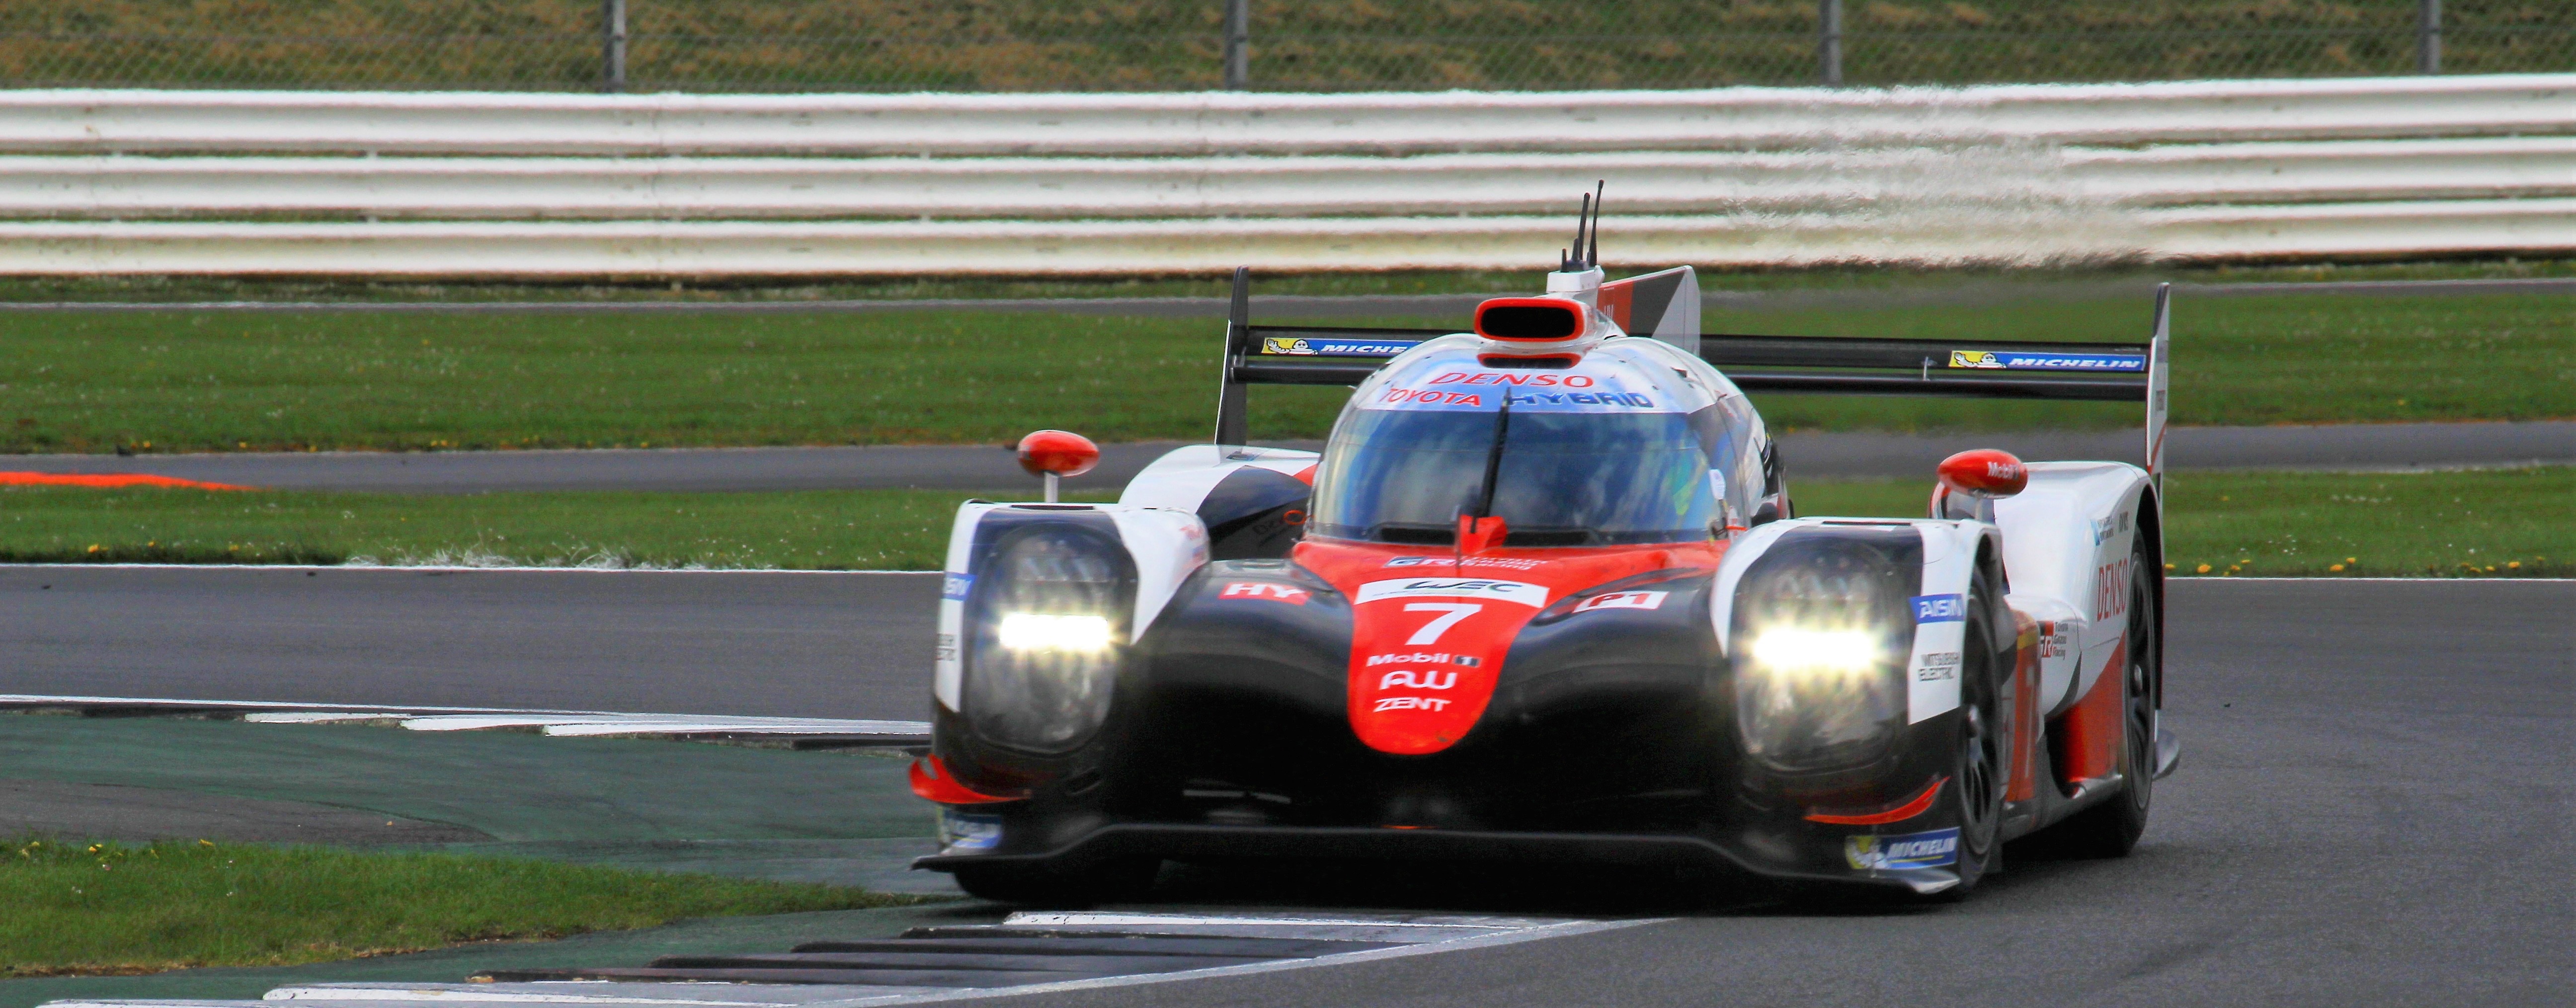 Change in regs deals initial blow to Toyota title challenge